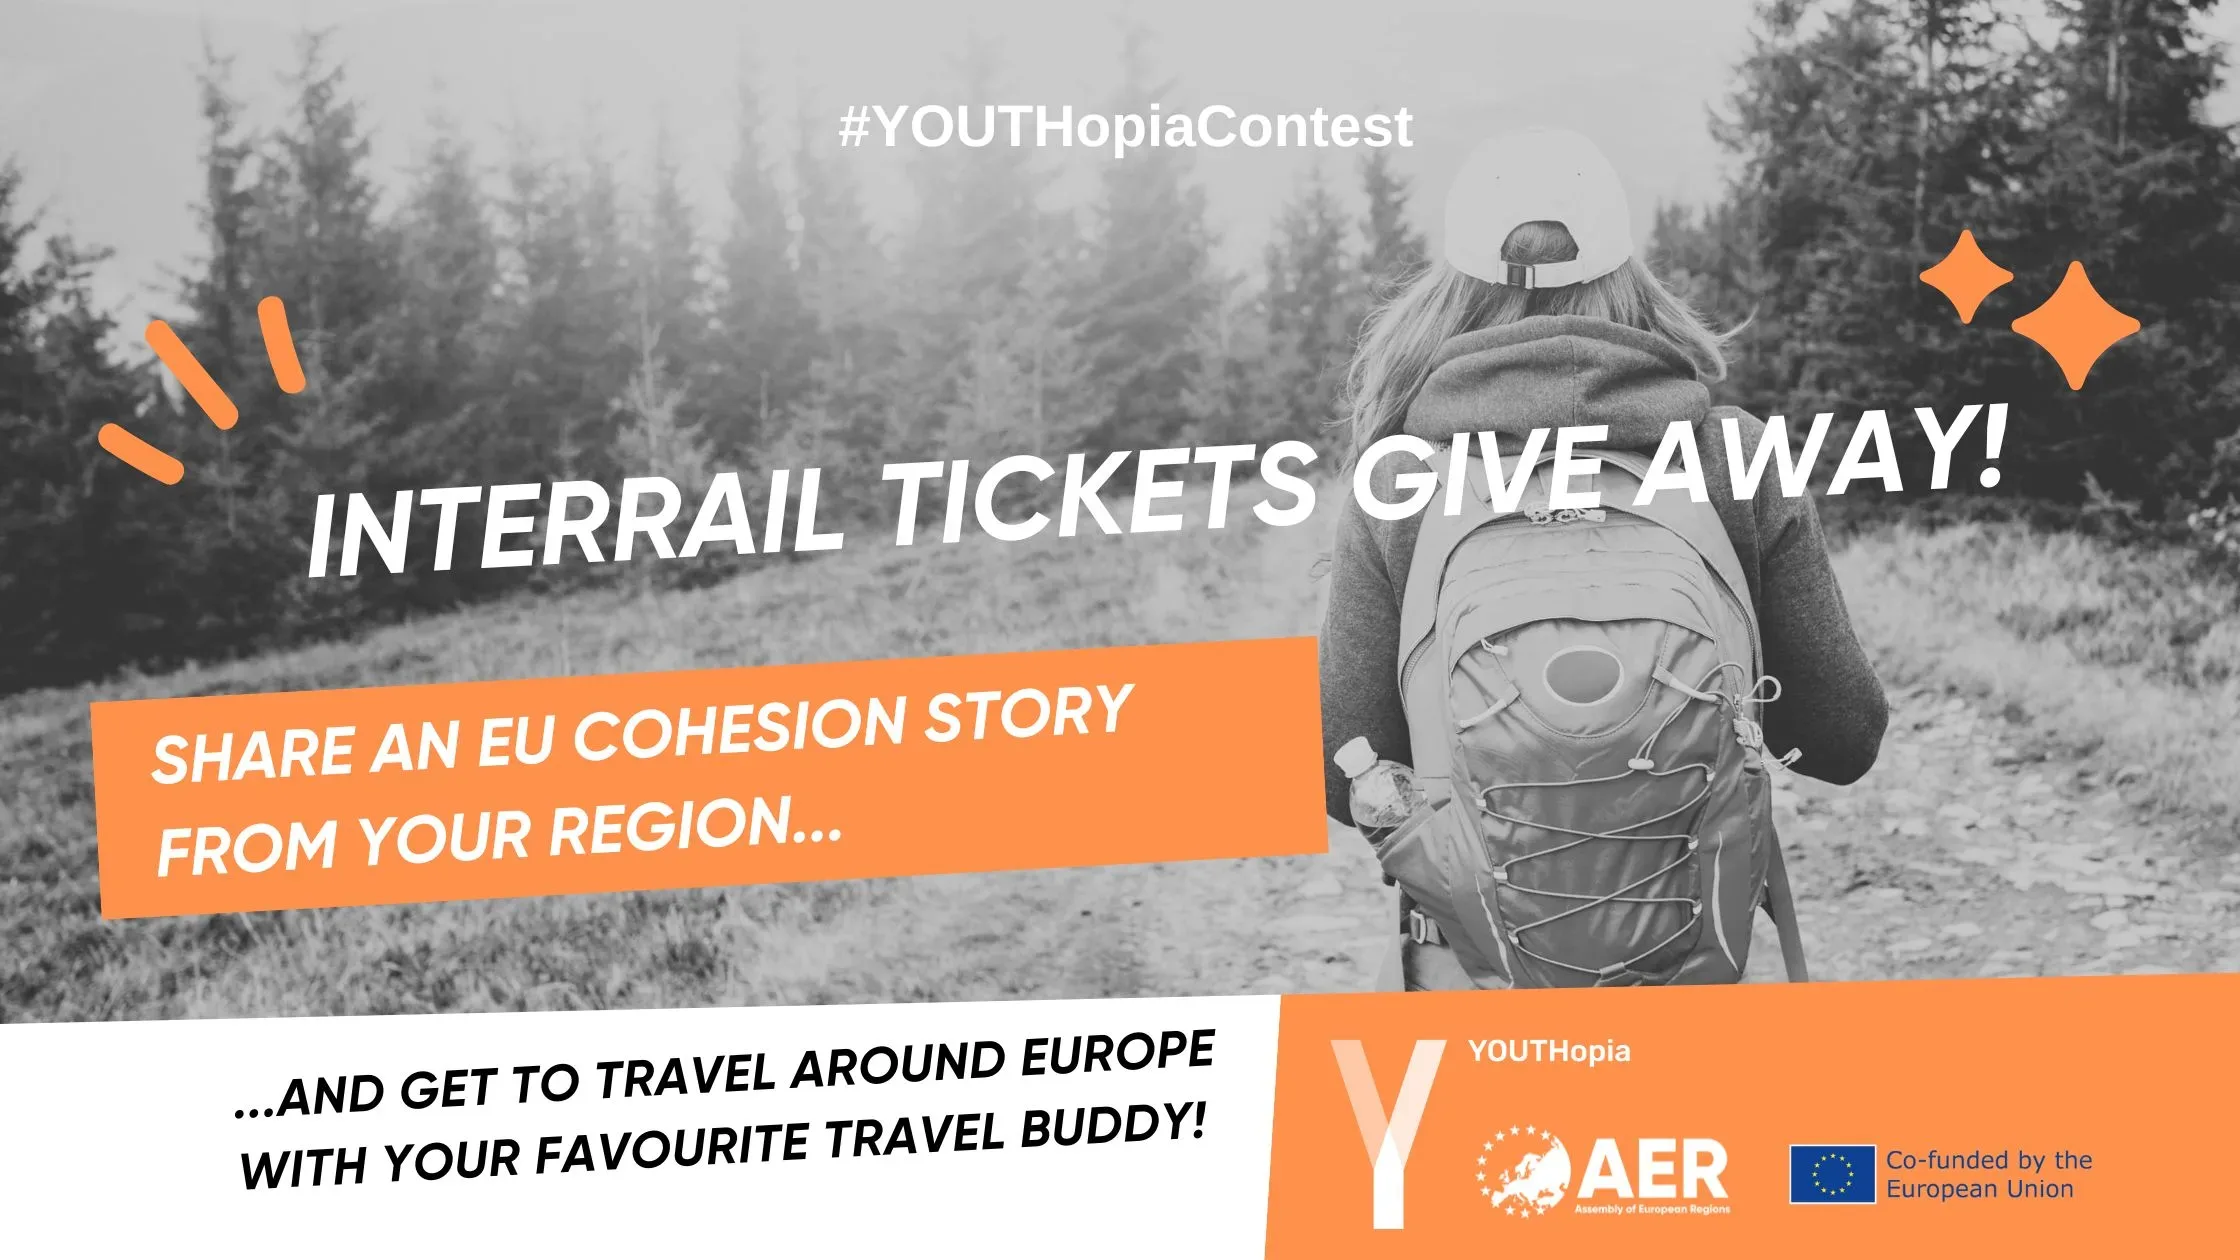 #HotlineCohesion - Get to Travel Across Europe with the #YOUTHopiaContest! (Deadline: 10 August)